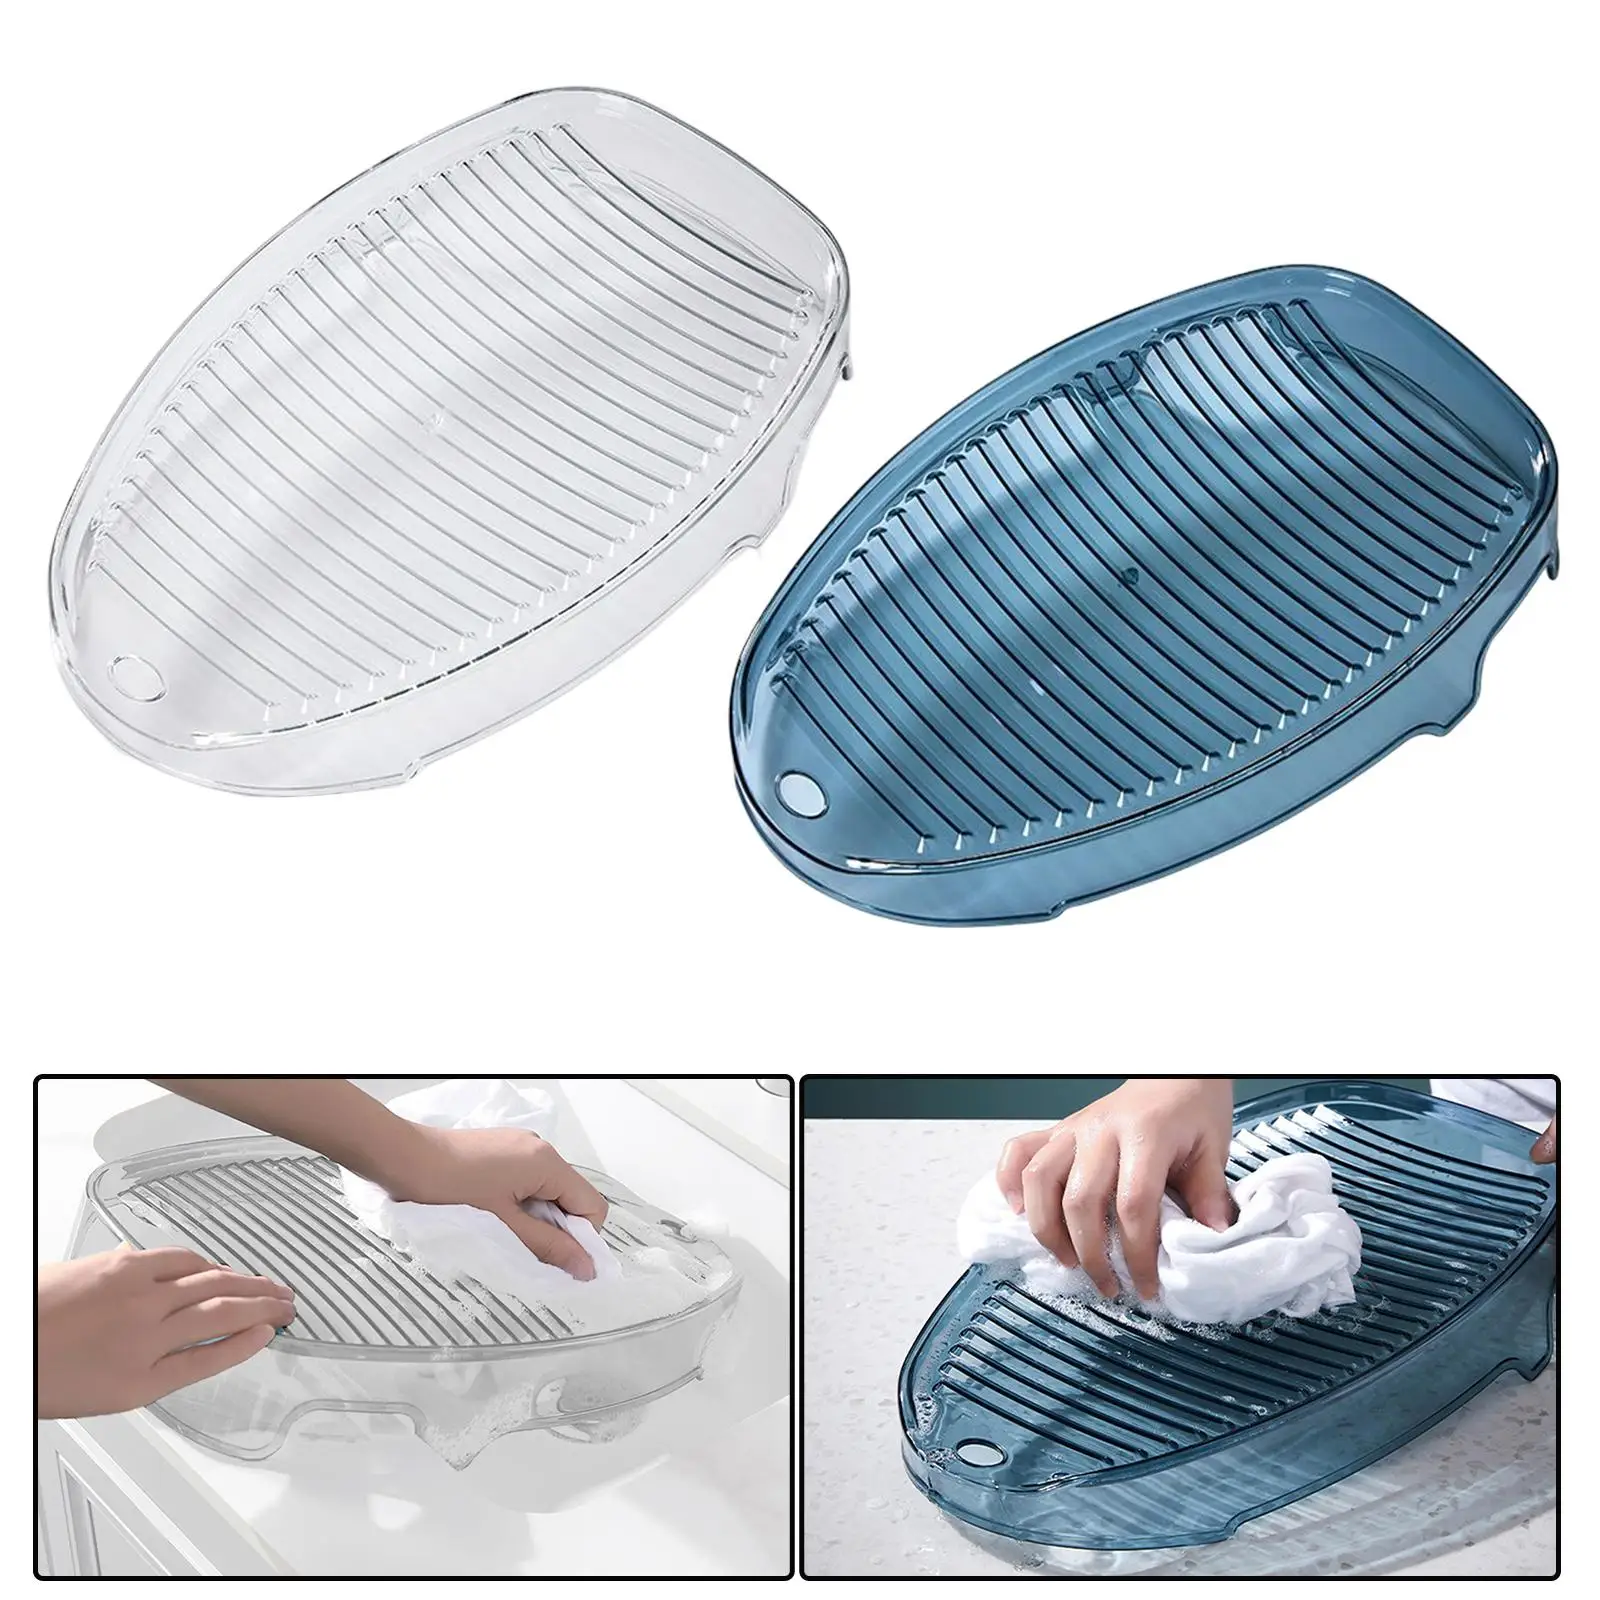 Washing Board Bathroom Accessories Thicken Laundry Cleaning Tool Portable Anti Slip Washboard for Underwear Washing Clothes Home